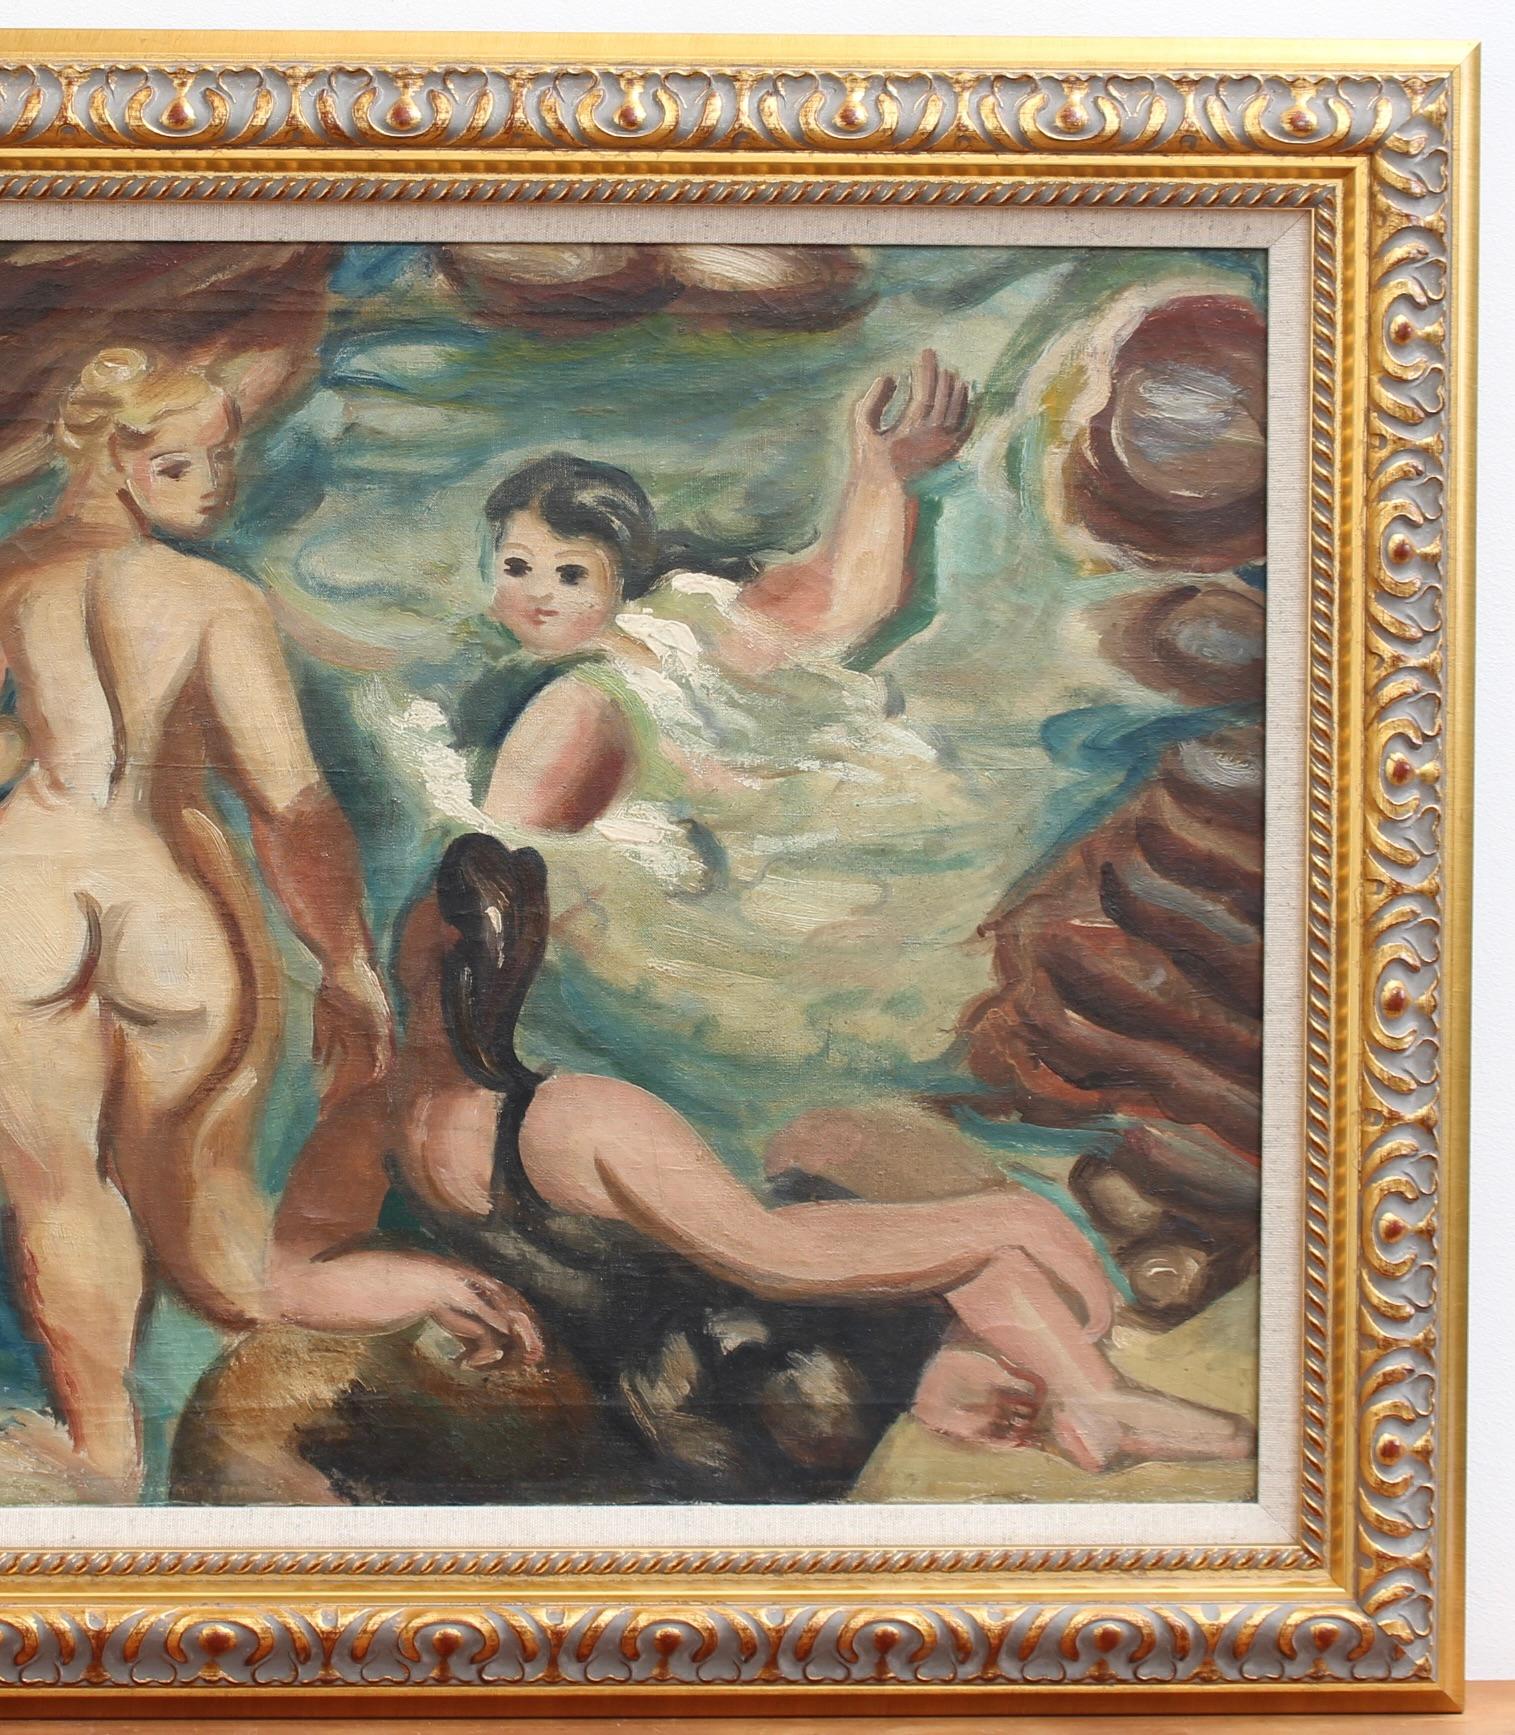 'The Bathers', oil on canvas, by Louis Latapie (circa 1930s). For centuries, artists have drawn endless inspiration from the modest bather. Whether washing in a tub, in a basin, or in a pond or lake, the bathing figure has popped up in art since